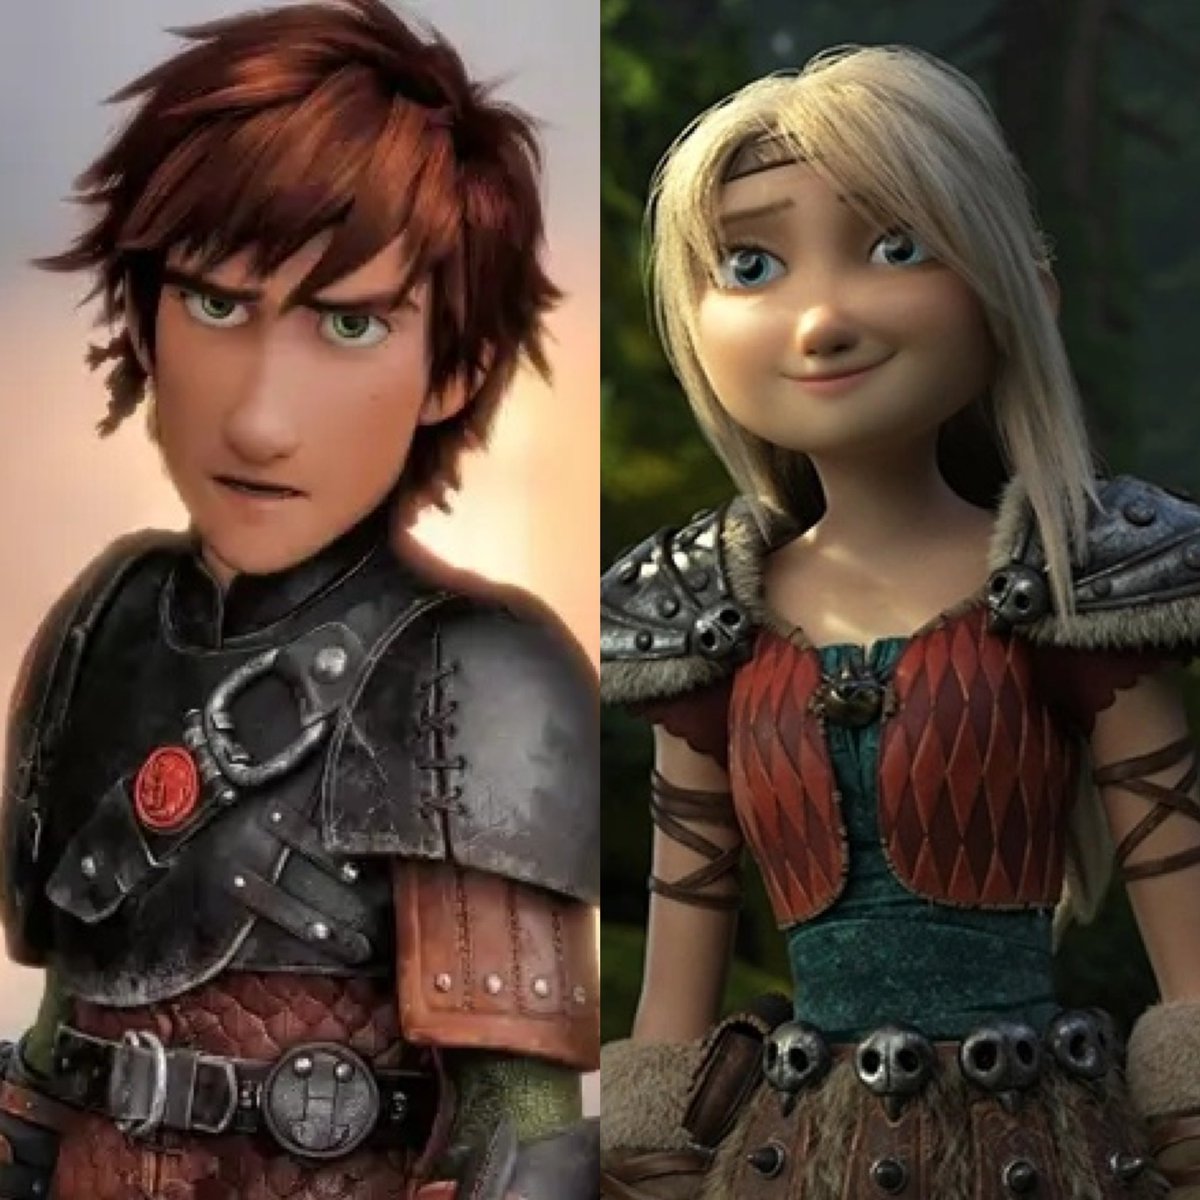 Mason Thames and Nico Parker have been cast as Hiccup and Astrid in the ‘How To Train Your Dragon’ live-action movie.